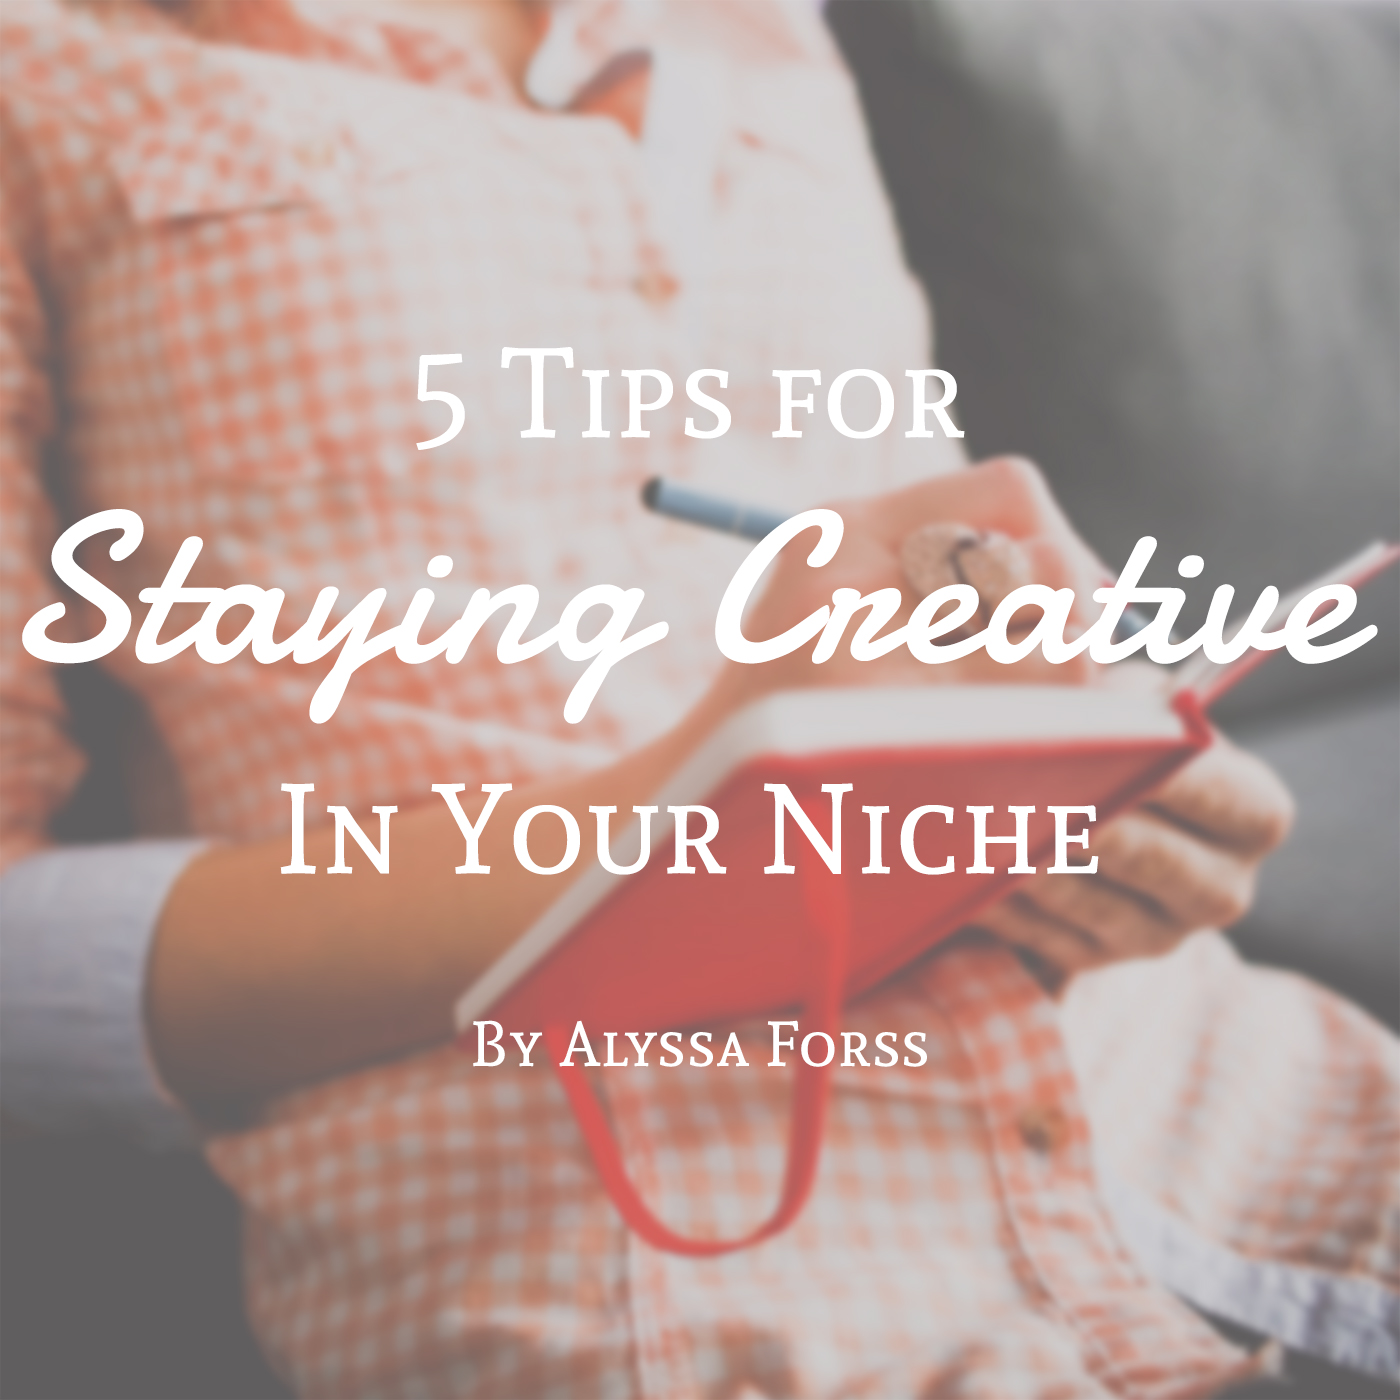 5 Tips for Staying Creative in Your Niche